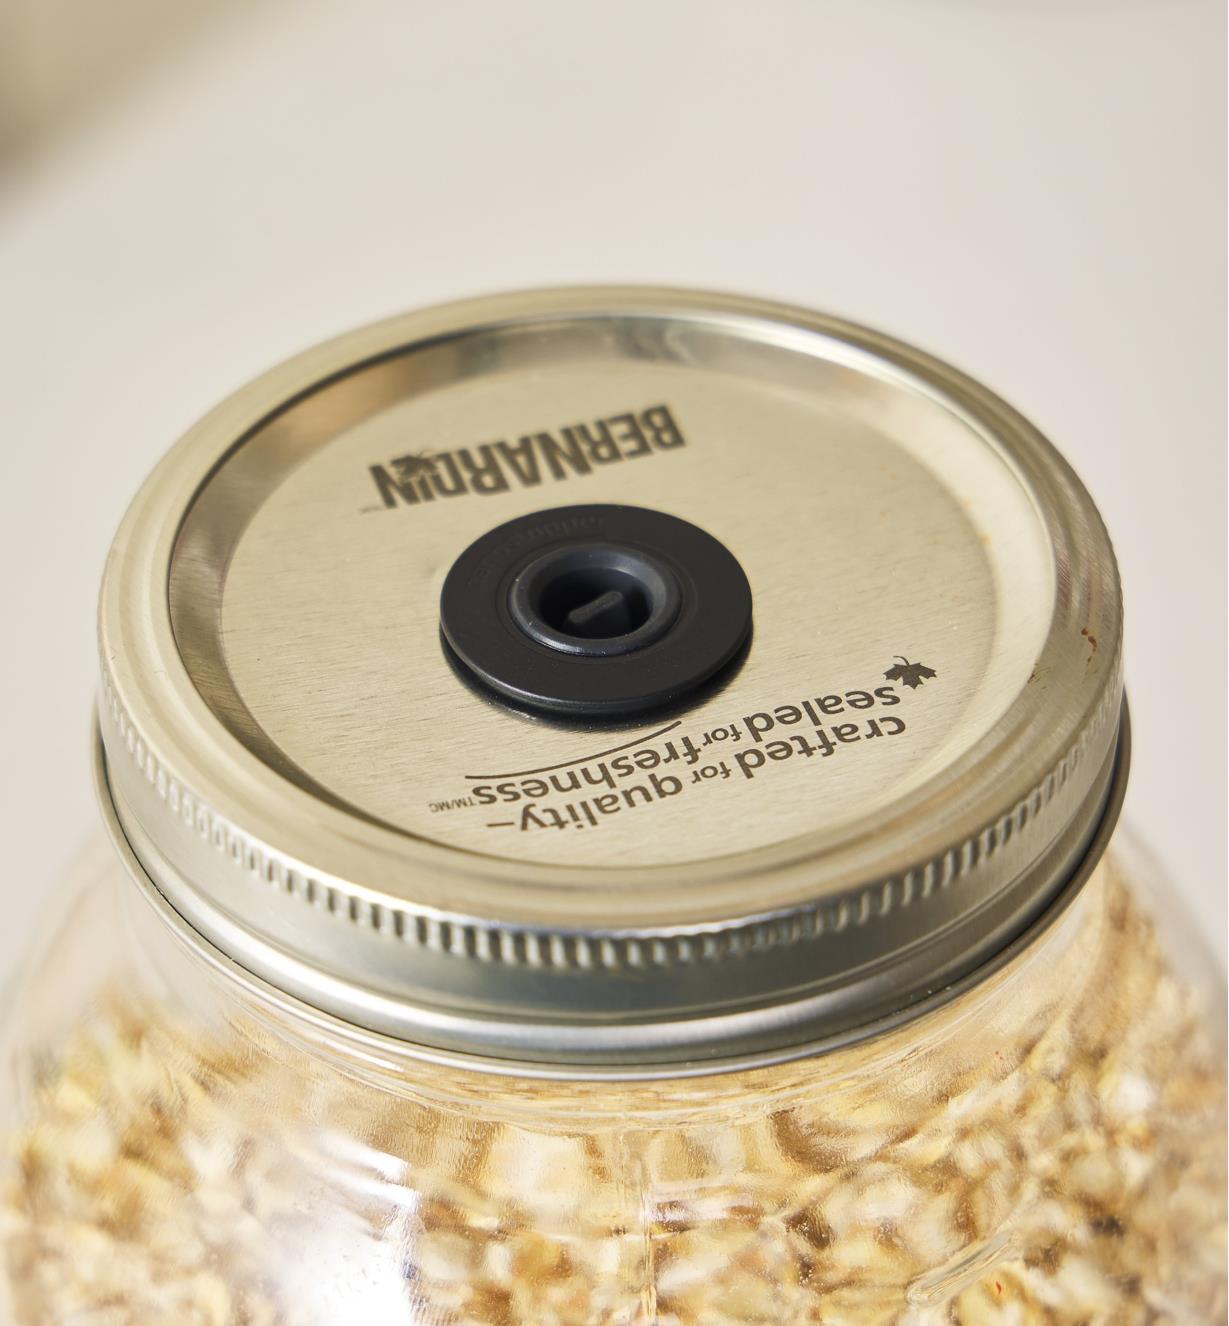 A close-up view of an Airtender stopper valve inserted into a hole cut in the lid of a Mason jar